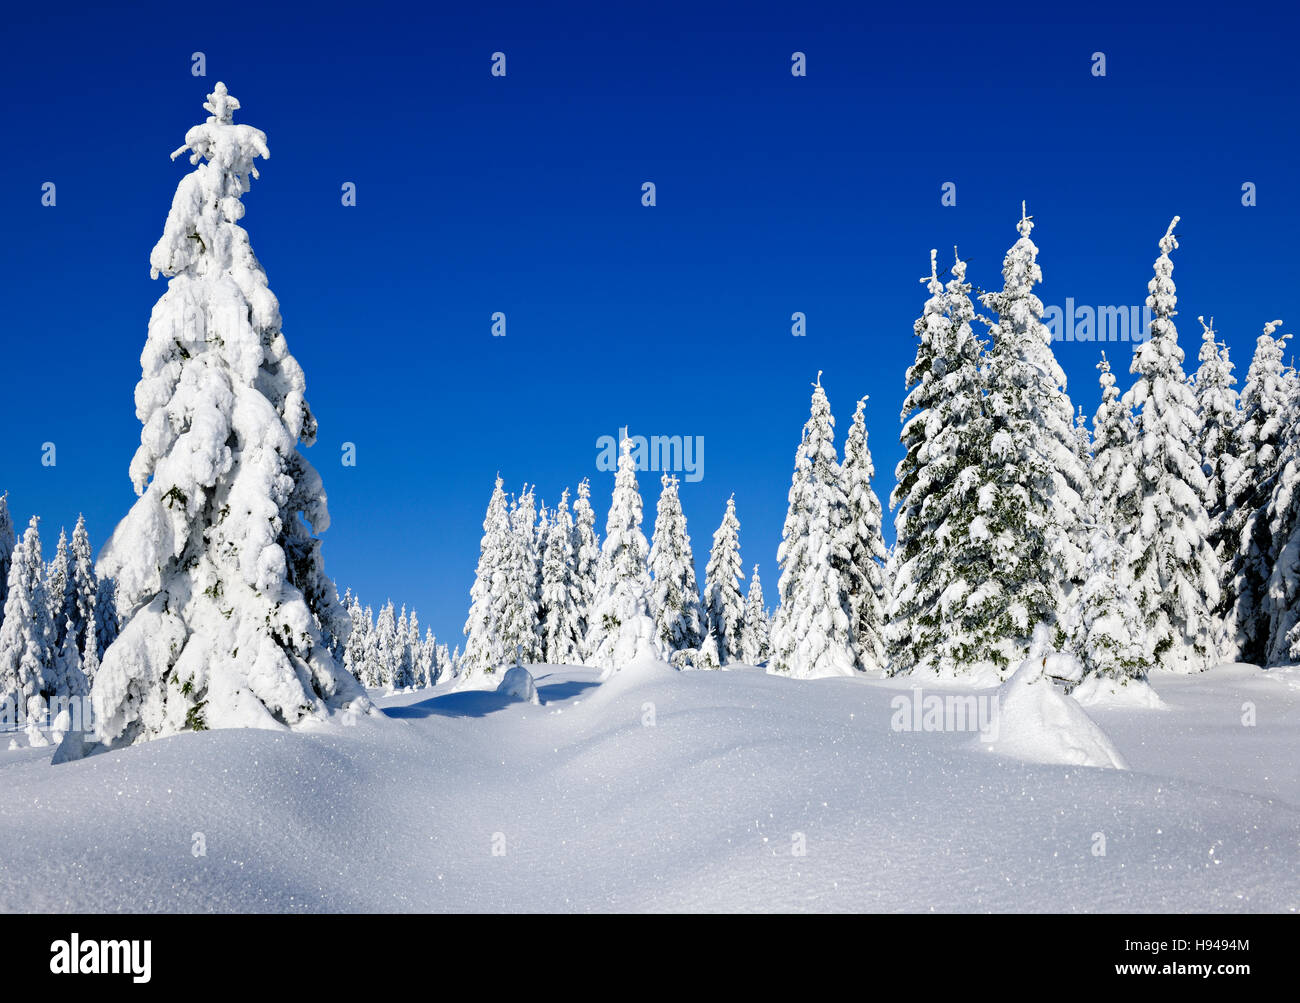 Snowy winter landscape in Harz National Park, snow-covered spruces, Saxony-Anhalt, Germany Stock Photo